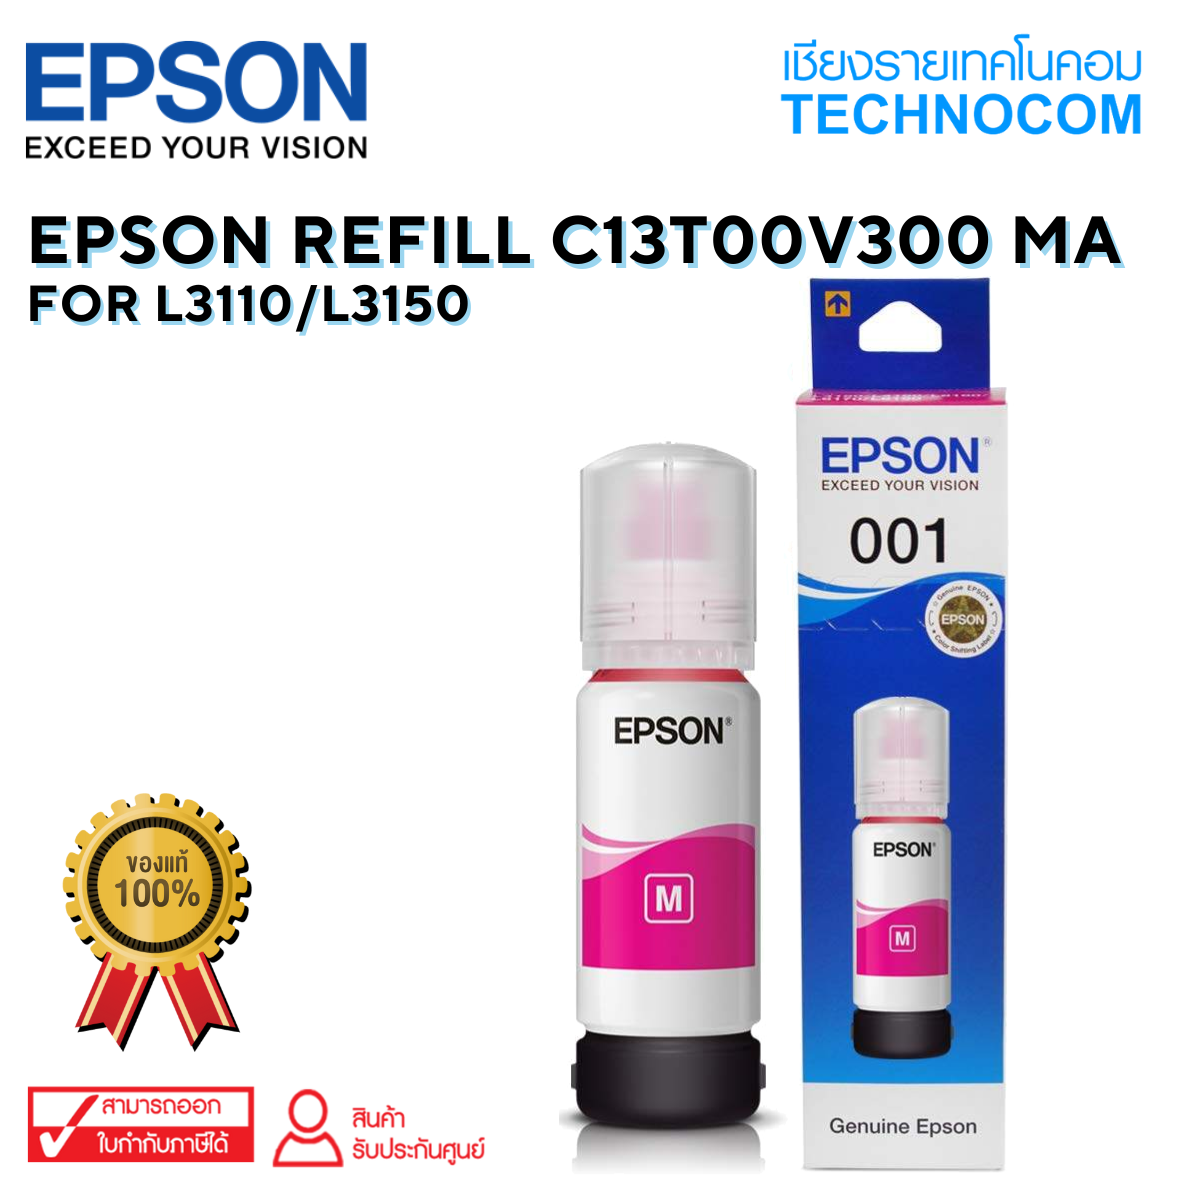 EPSON REFILL C13T00V300 MA For L3110/L3150